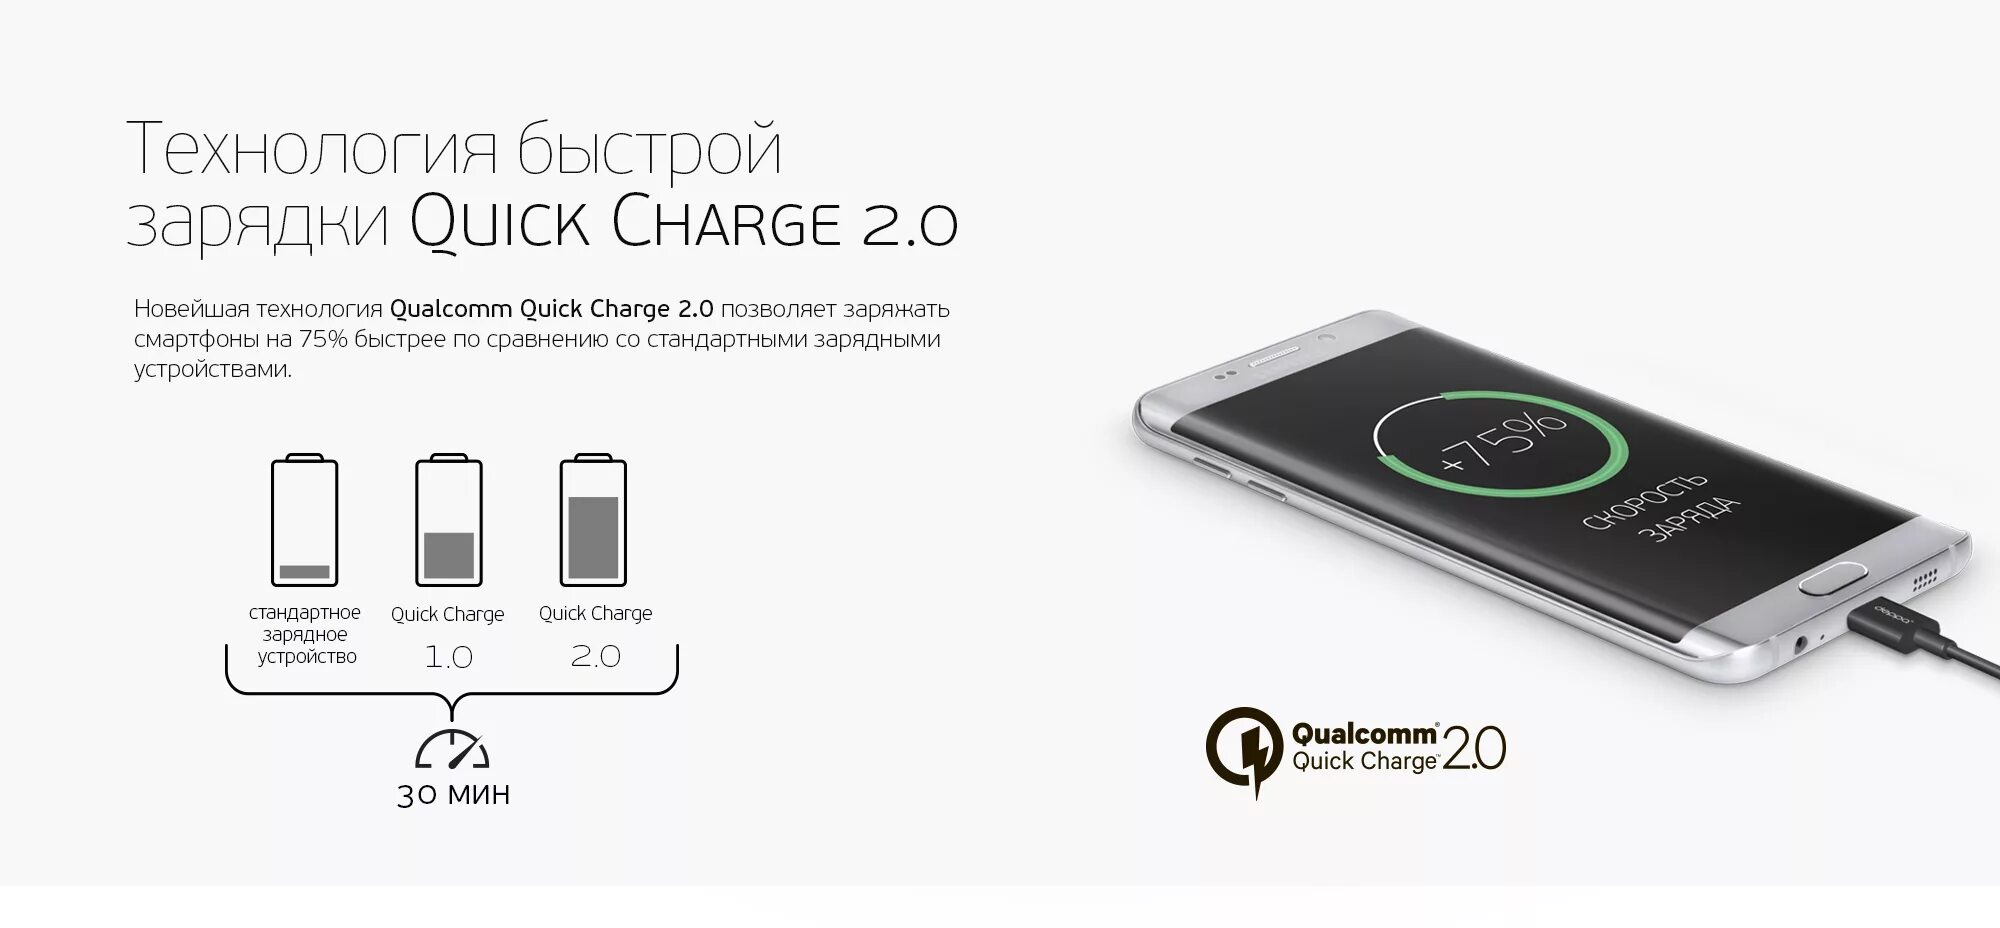 Quick charge 2.0 iphone. S20 Fe быстрая зарядка. Samsung quick charge. Беспроводная зарядка Qualcomm quick charge 4+.